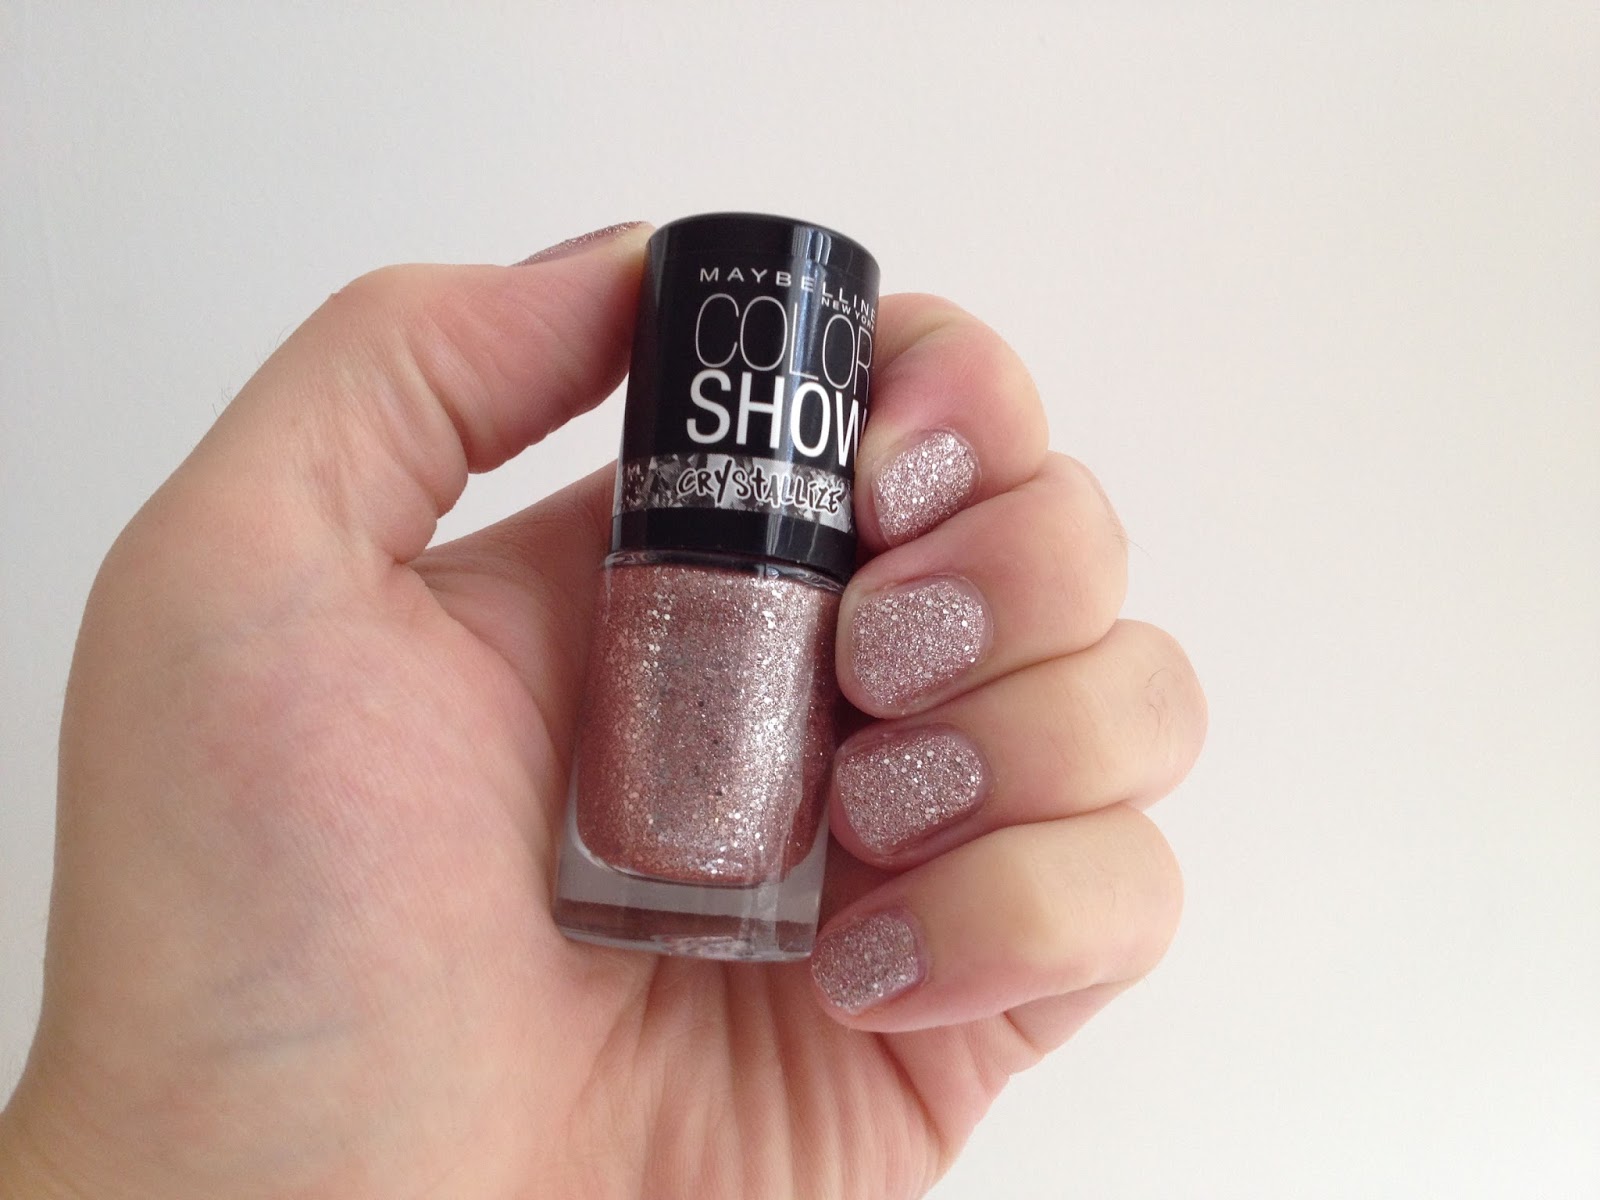 Maybelline Color Show Nail Polish in Pinkalicious Shades - wide 8